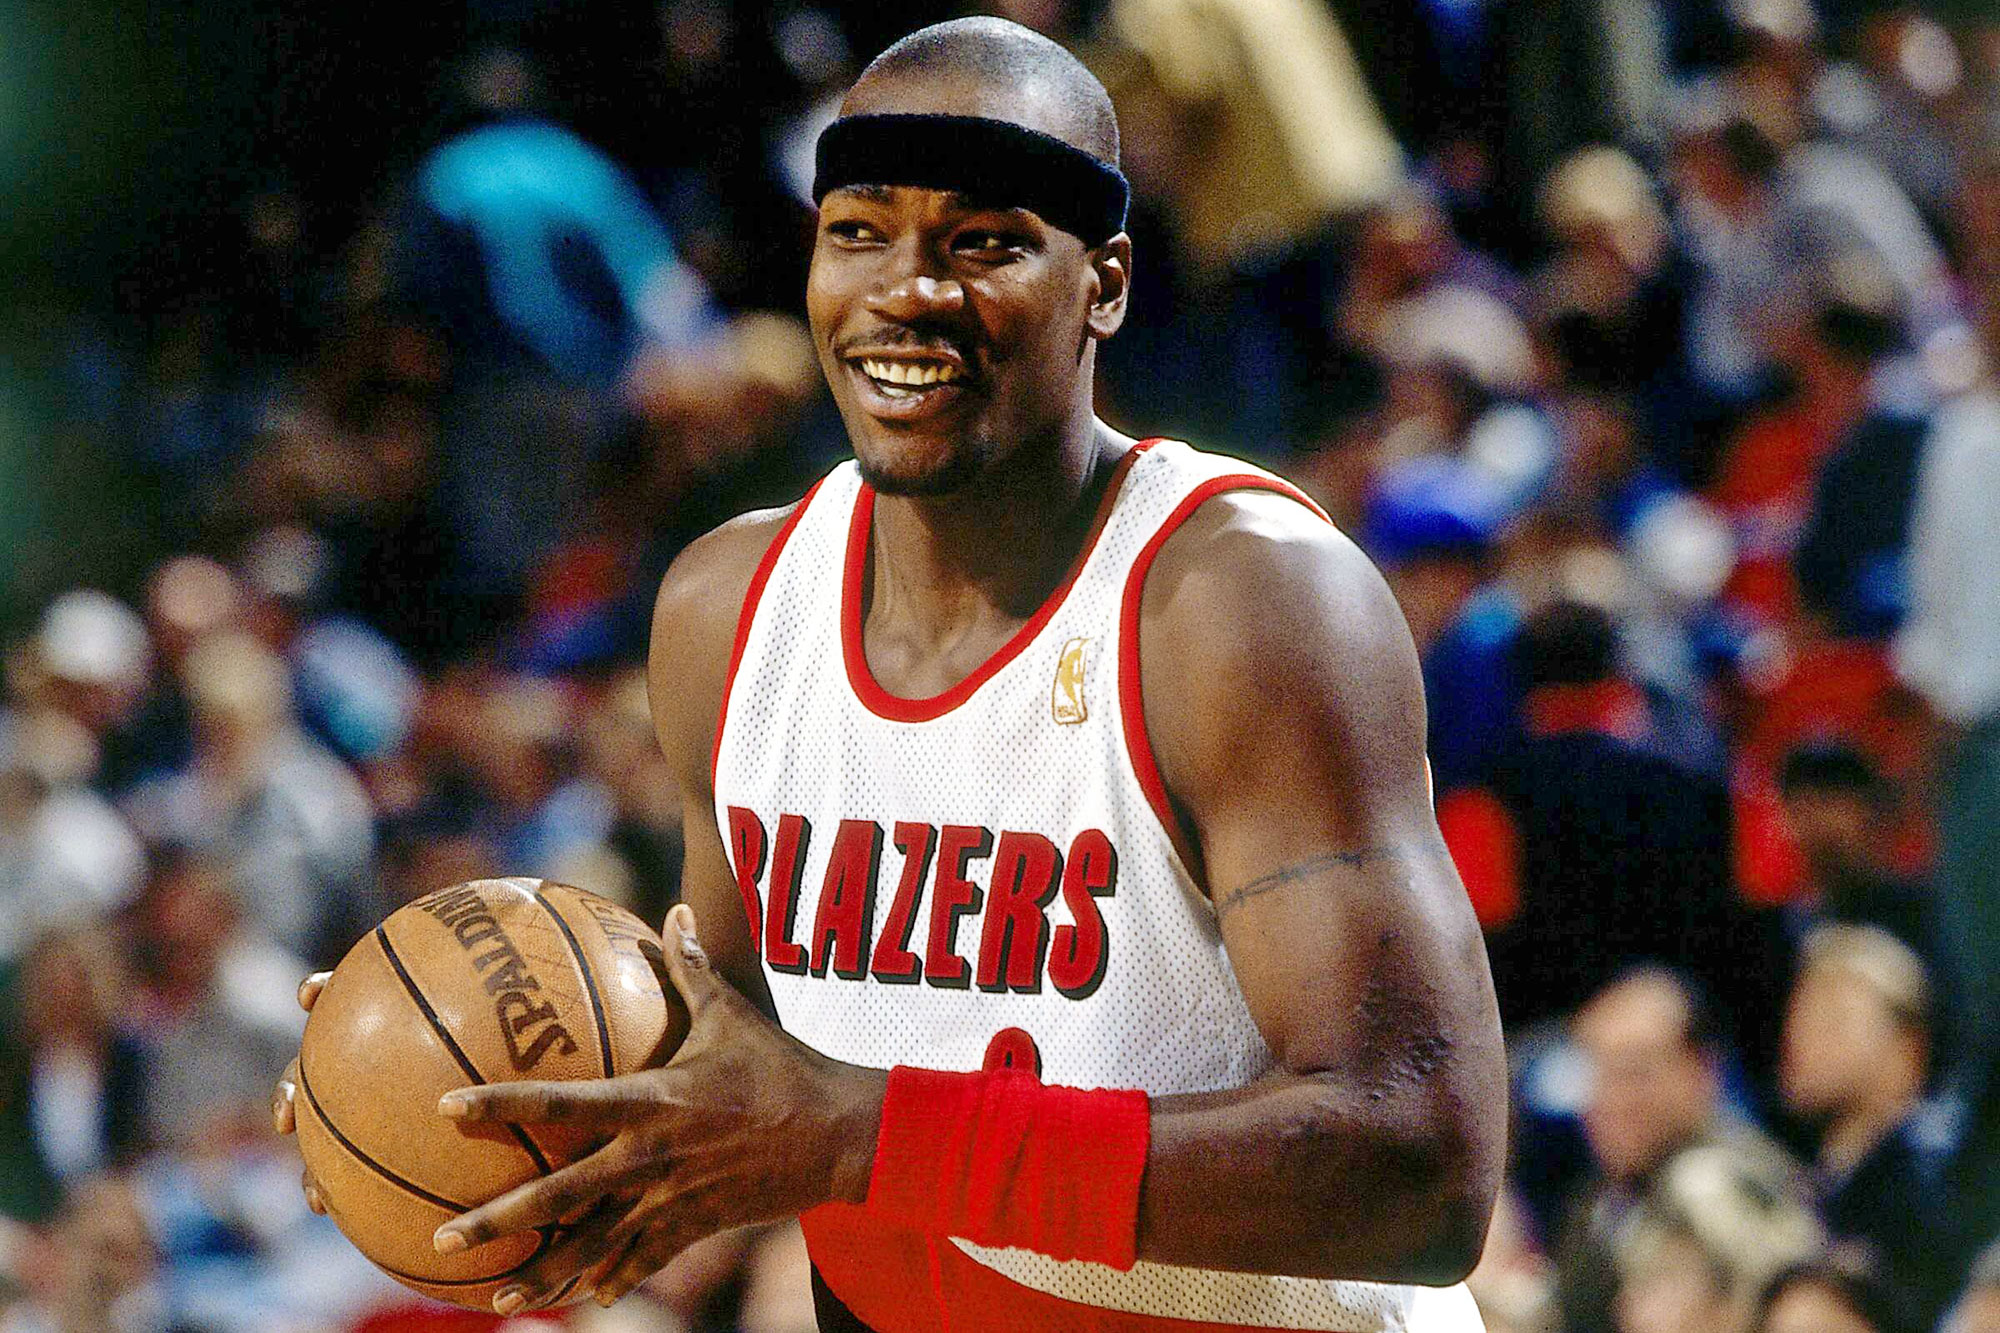 Trail Blazers great Clifford Robinson dies at 53 after battling